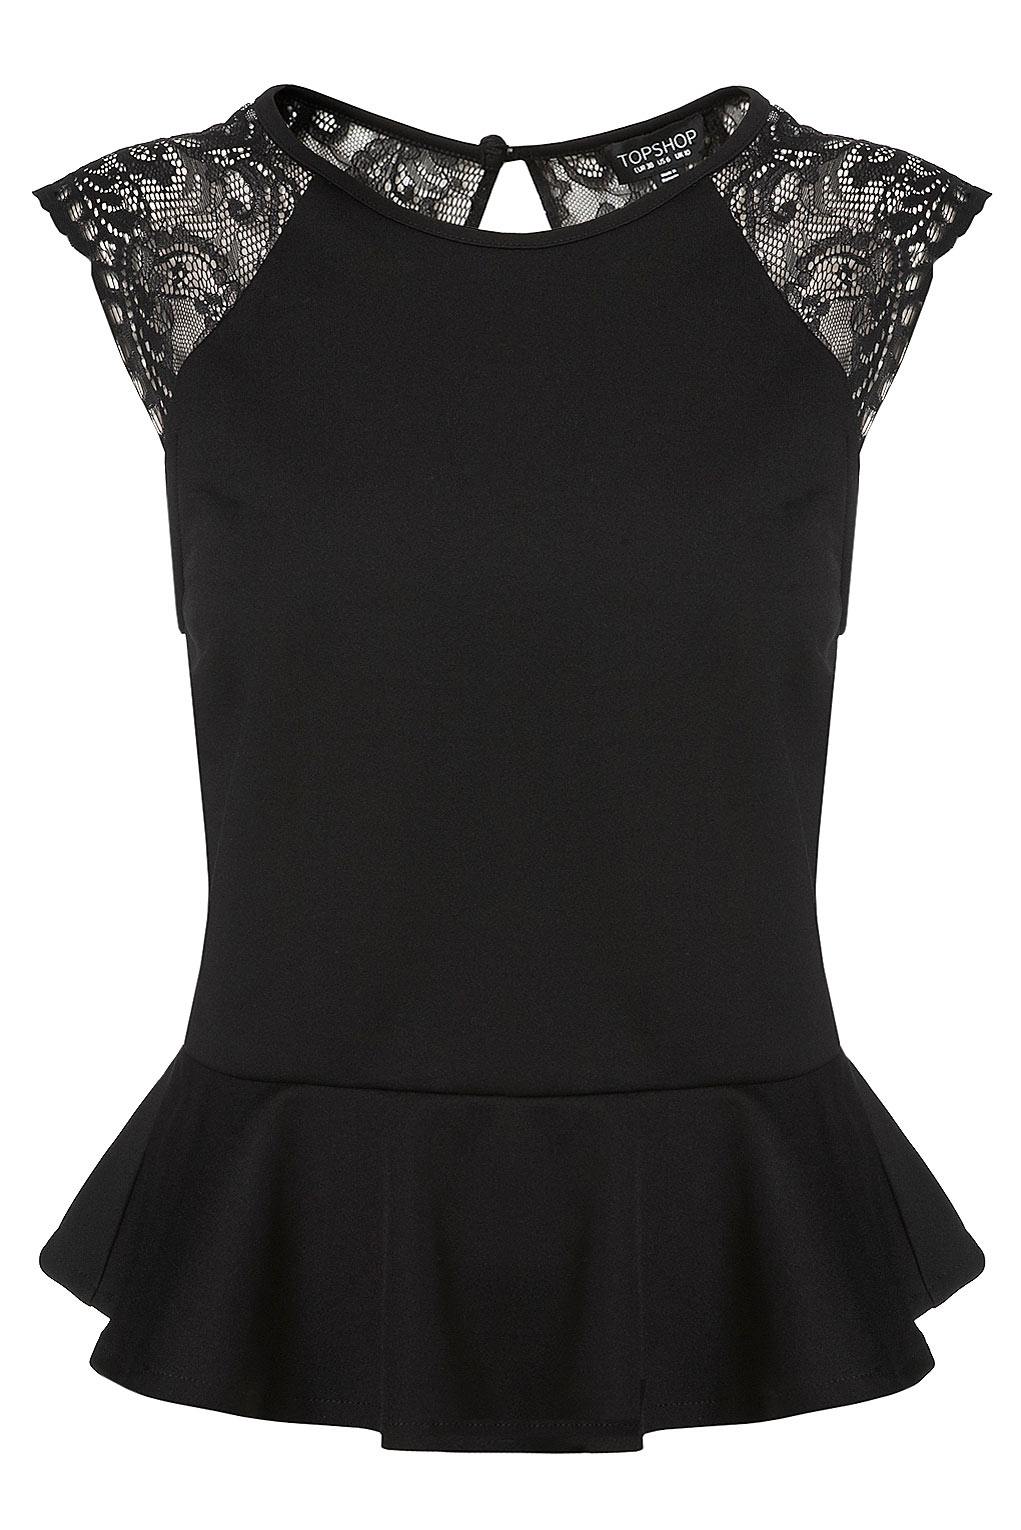 Topshop Lace Back Peplum Top in Black | Lyst